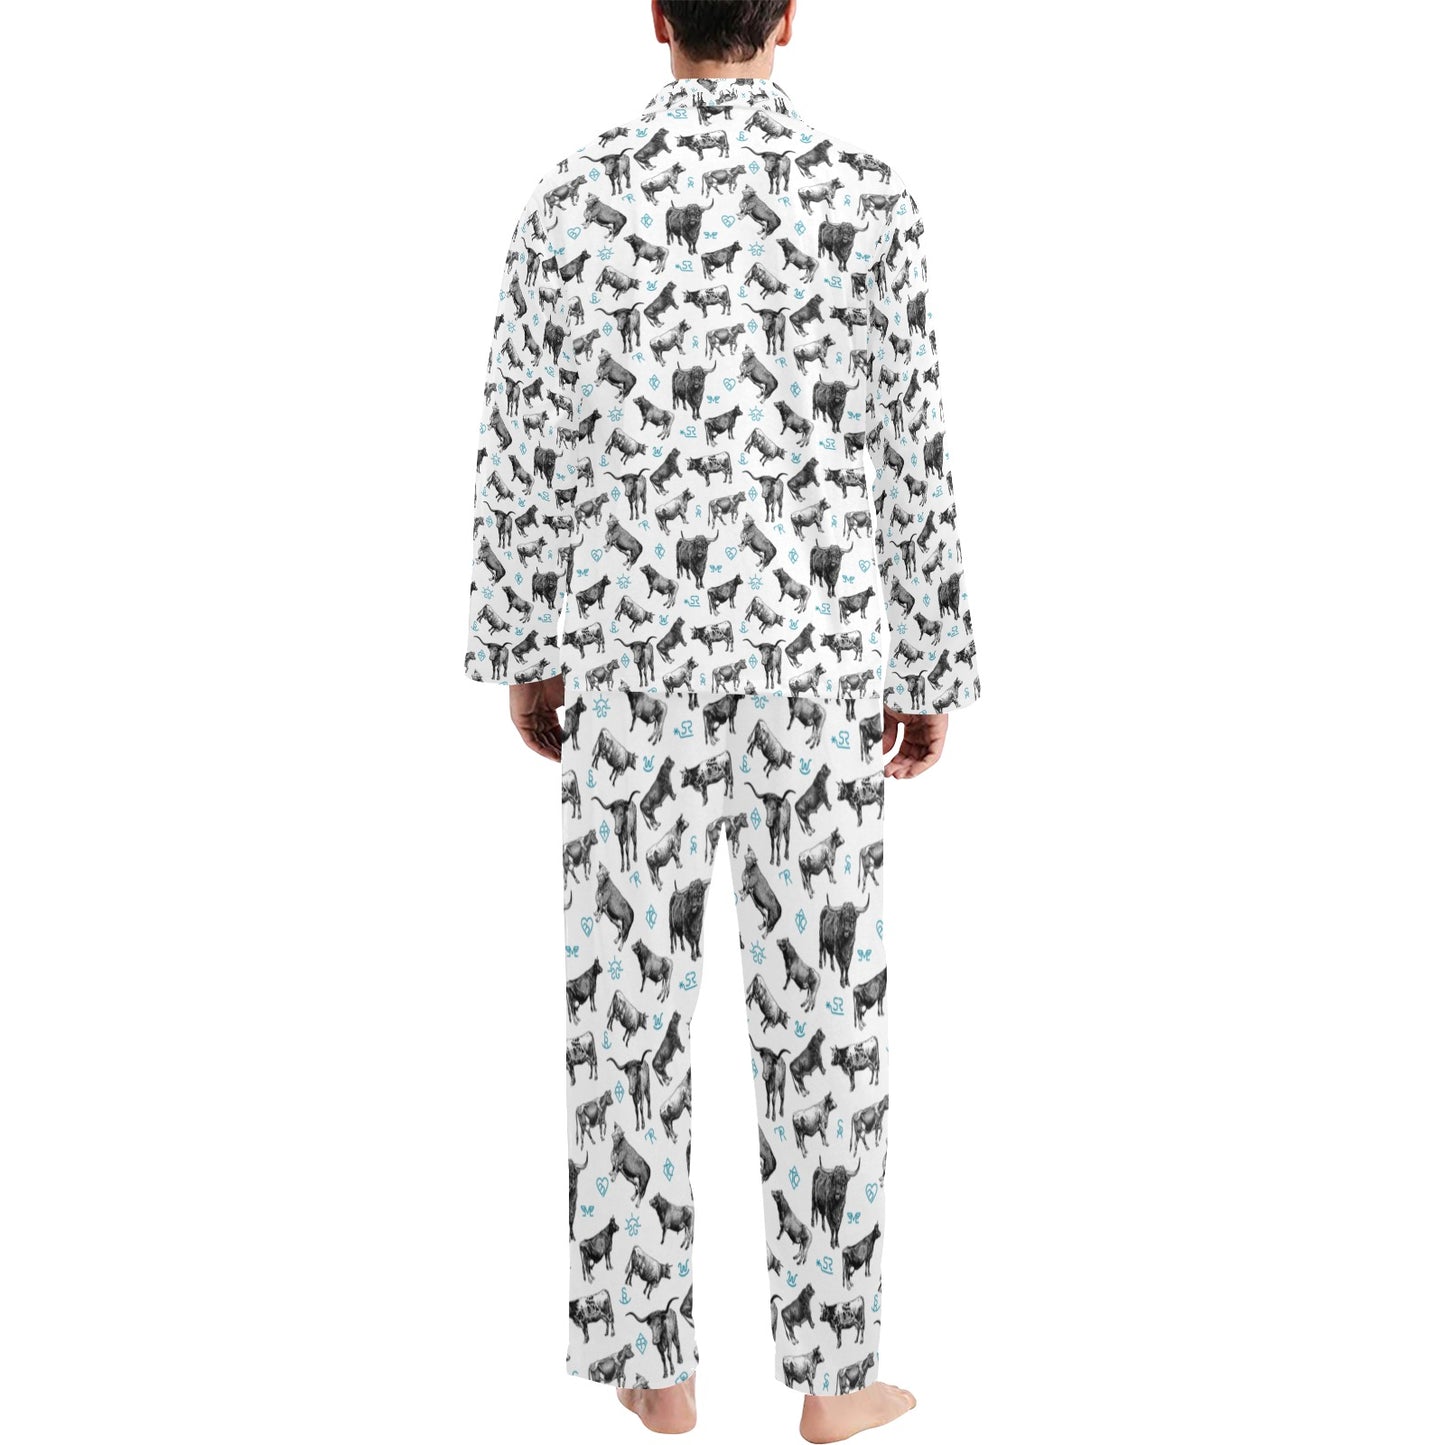 Cattle and Brands Men's Western Pajama Set